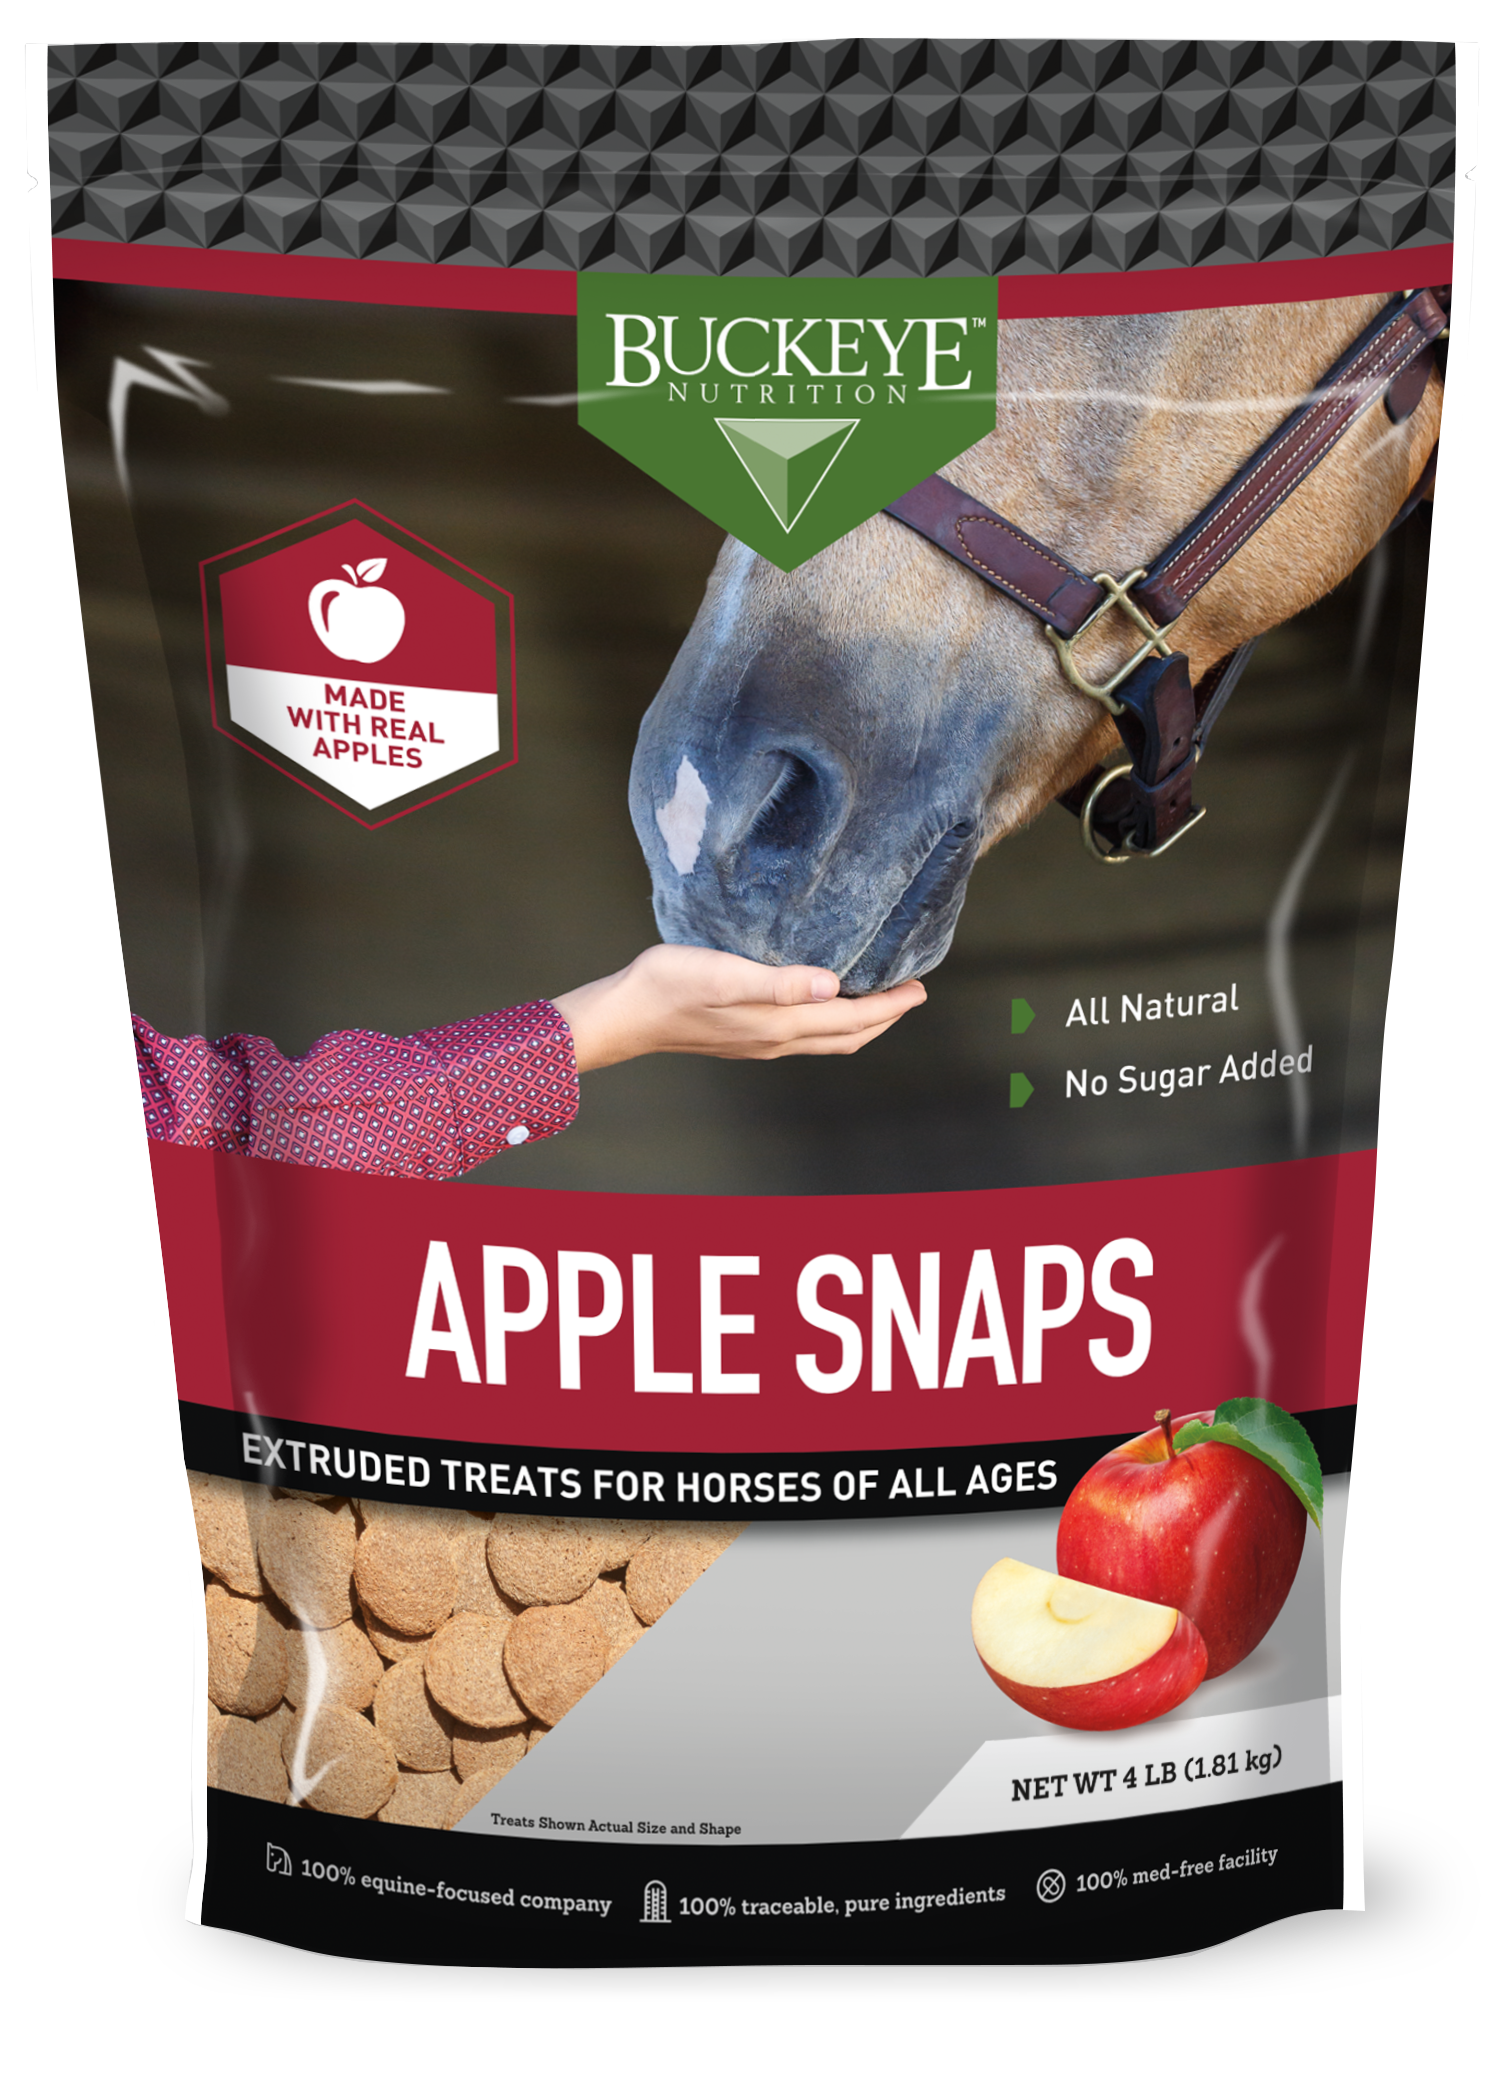 All Natural No Sugar Added Apple Snap Treats package image